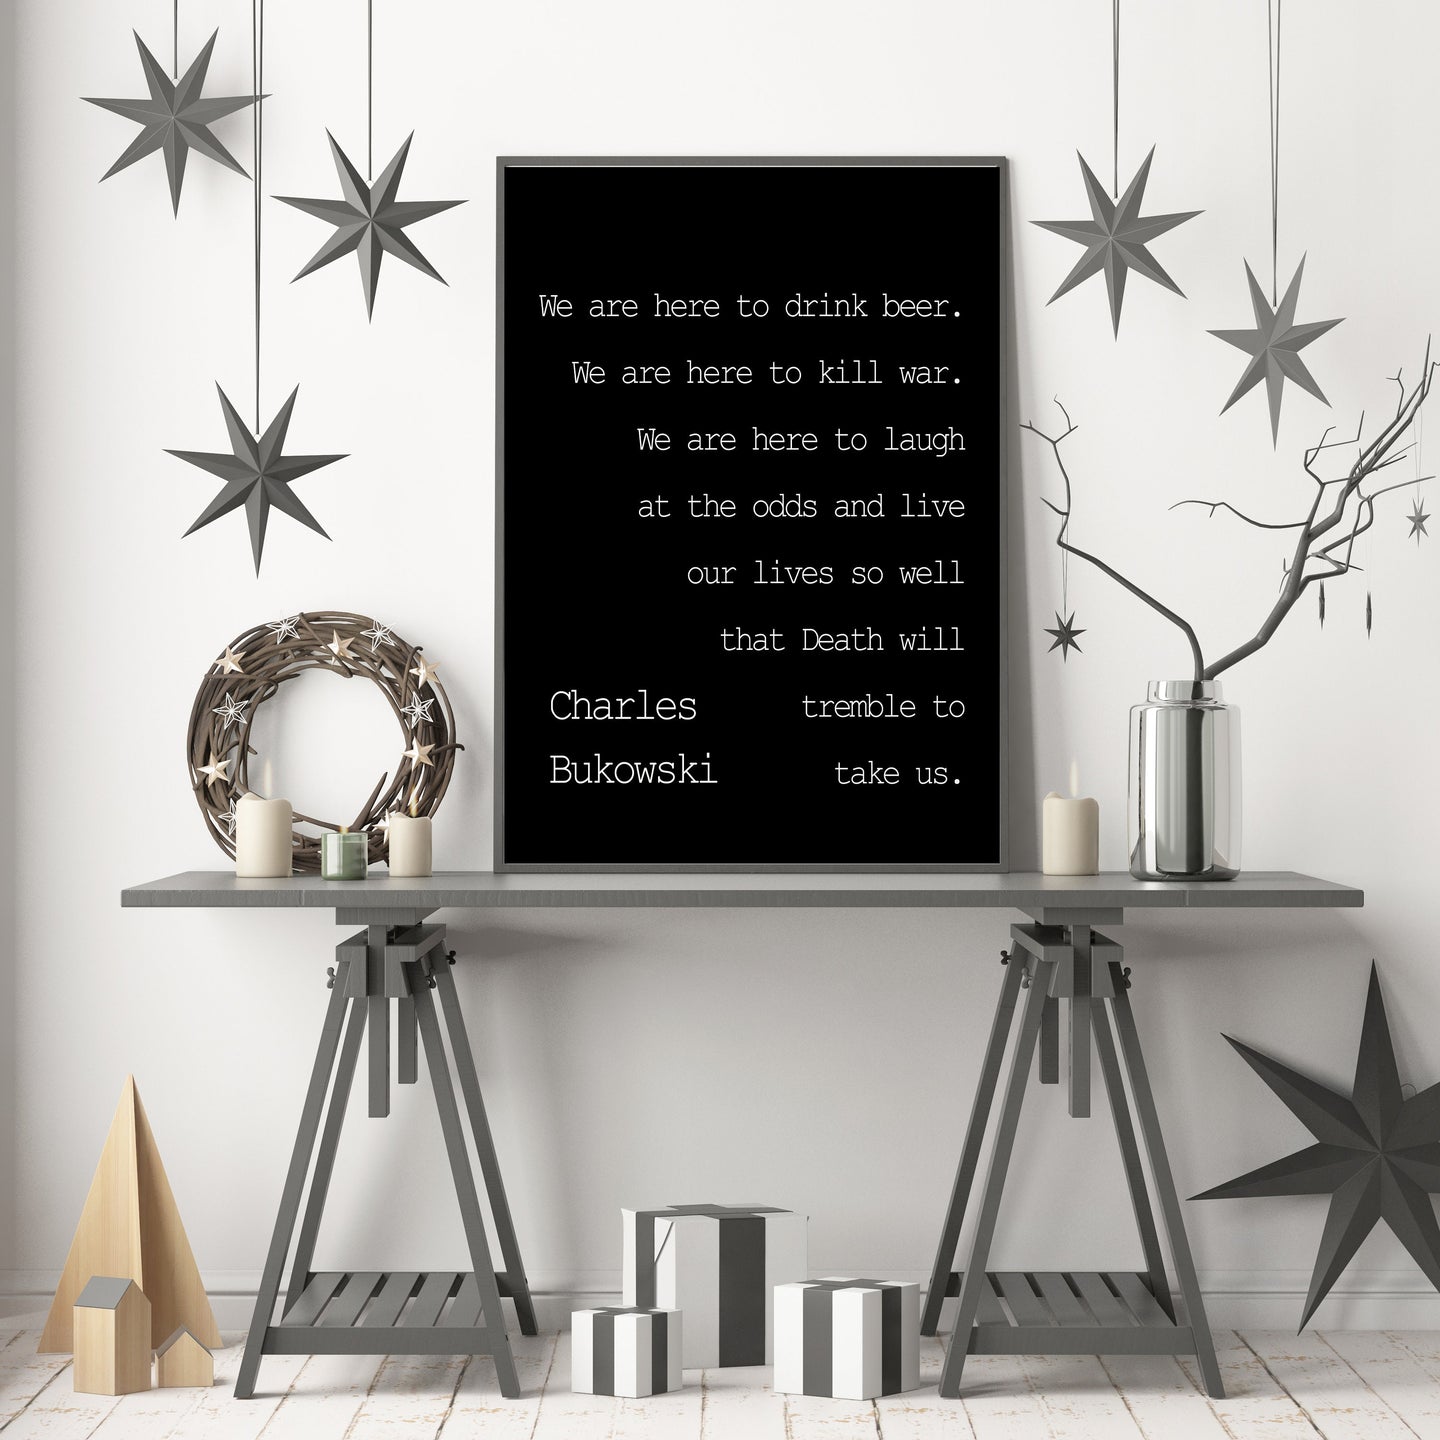 Charles Bukowski - We are here to laugh at the odds and live our lives - poem print poetry print wall art UNFRAMED